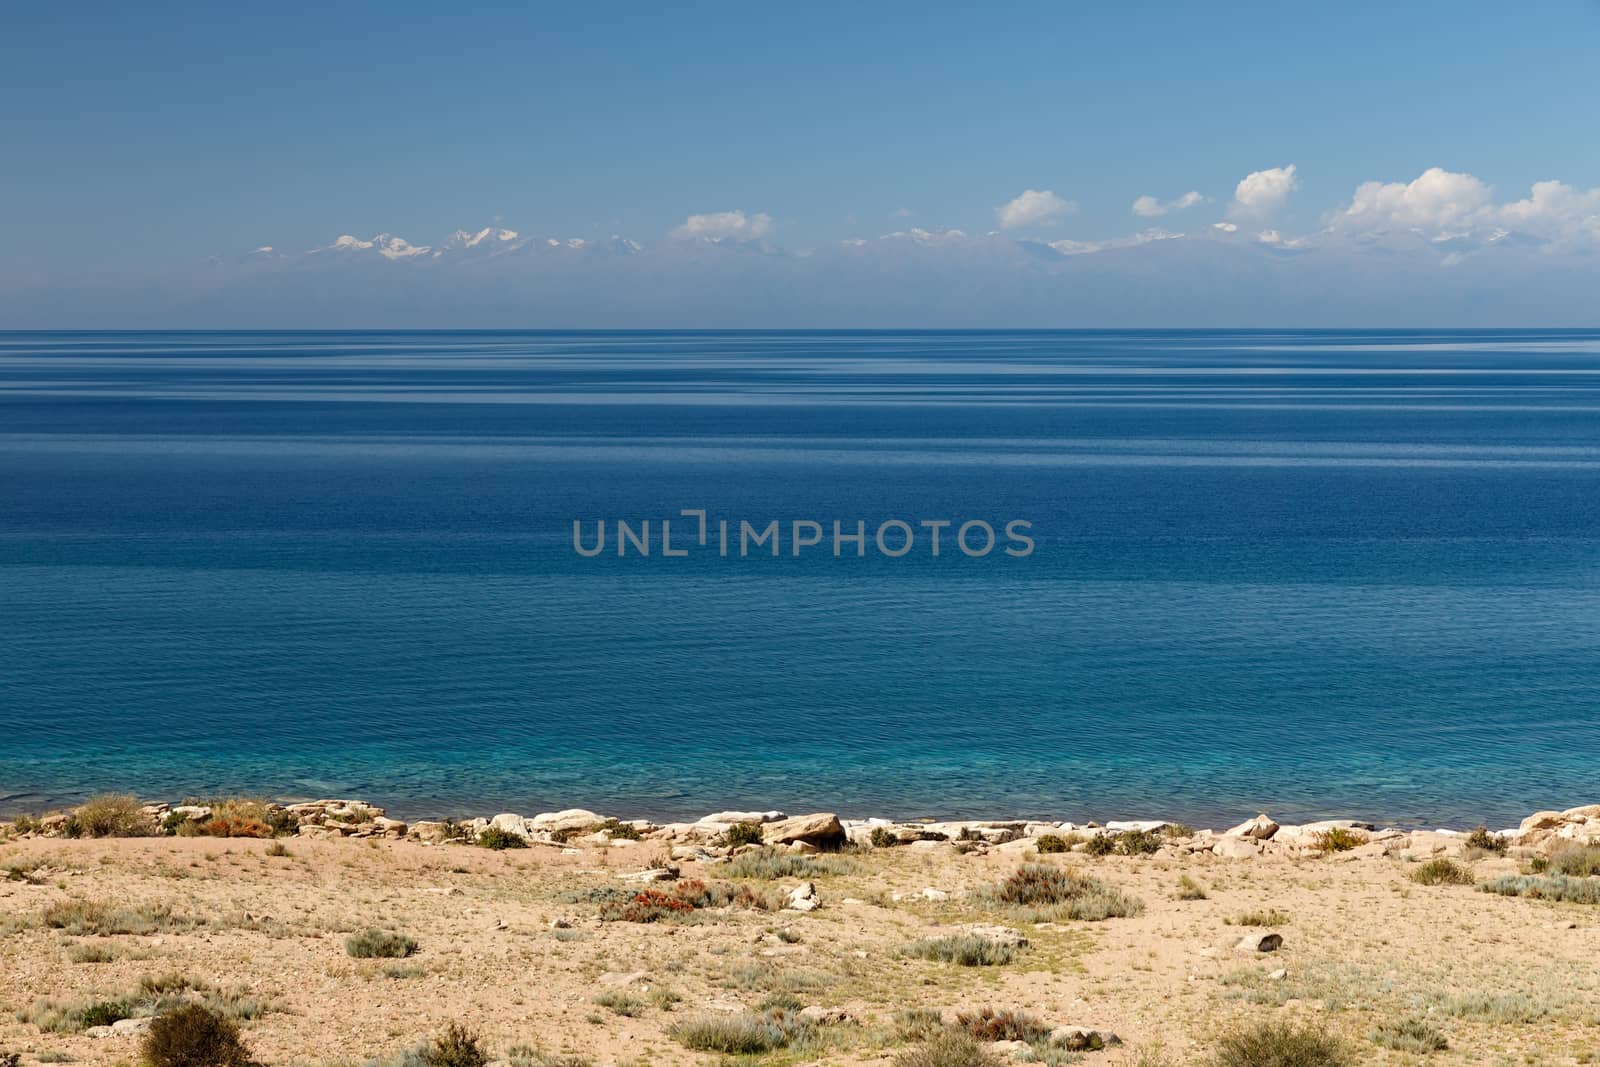 Lake Issyk-kul, the largest lake in Kyrgyzstan, mountain view on the north shore of the lake.